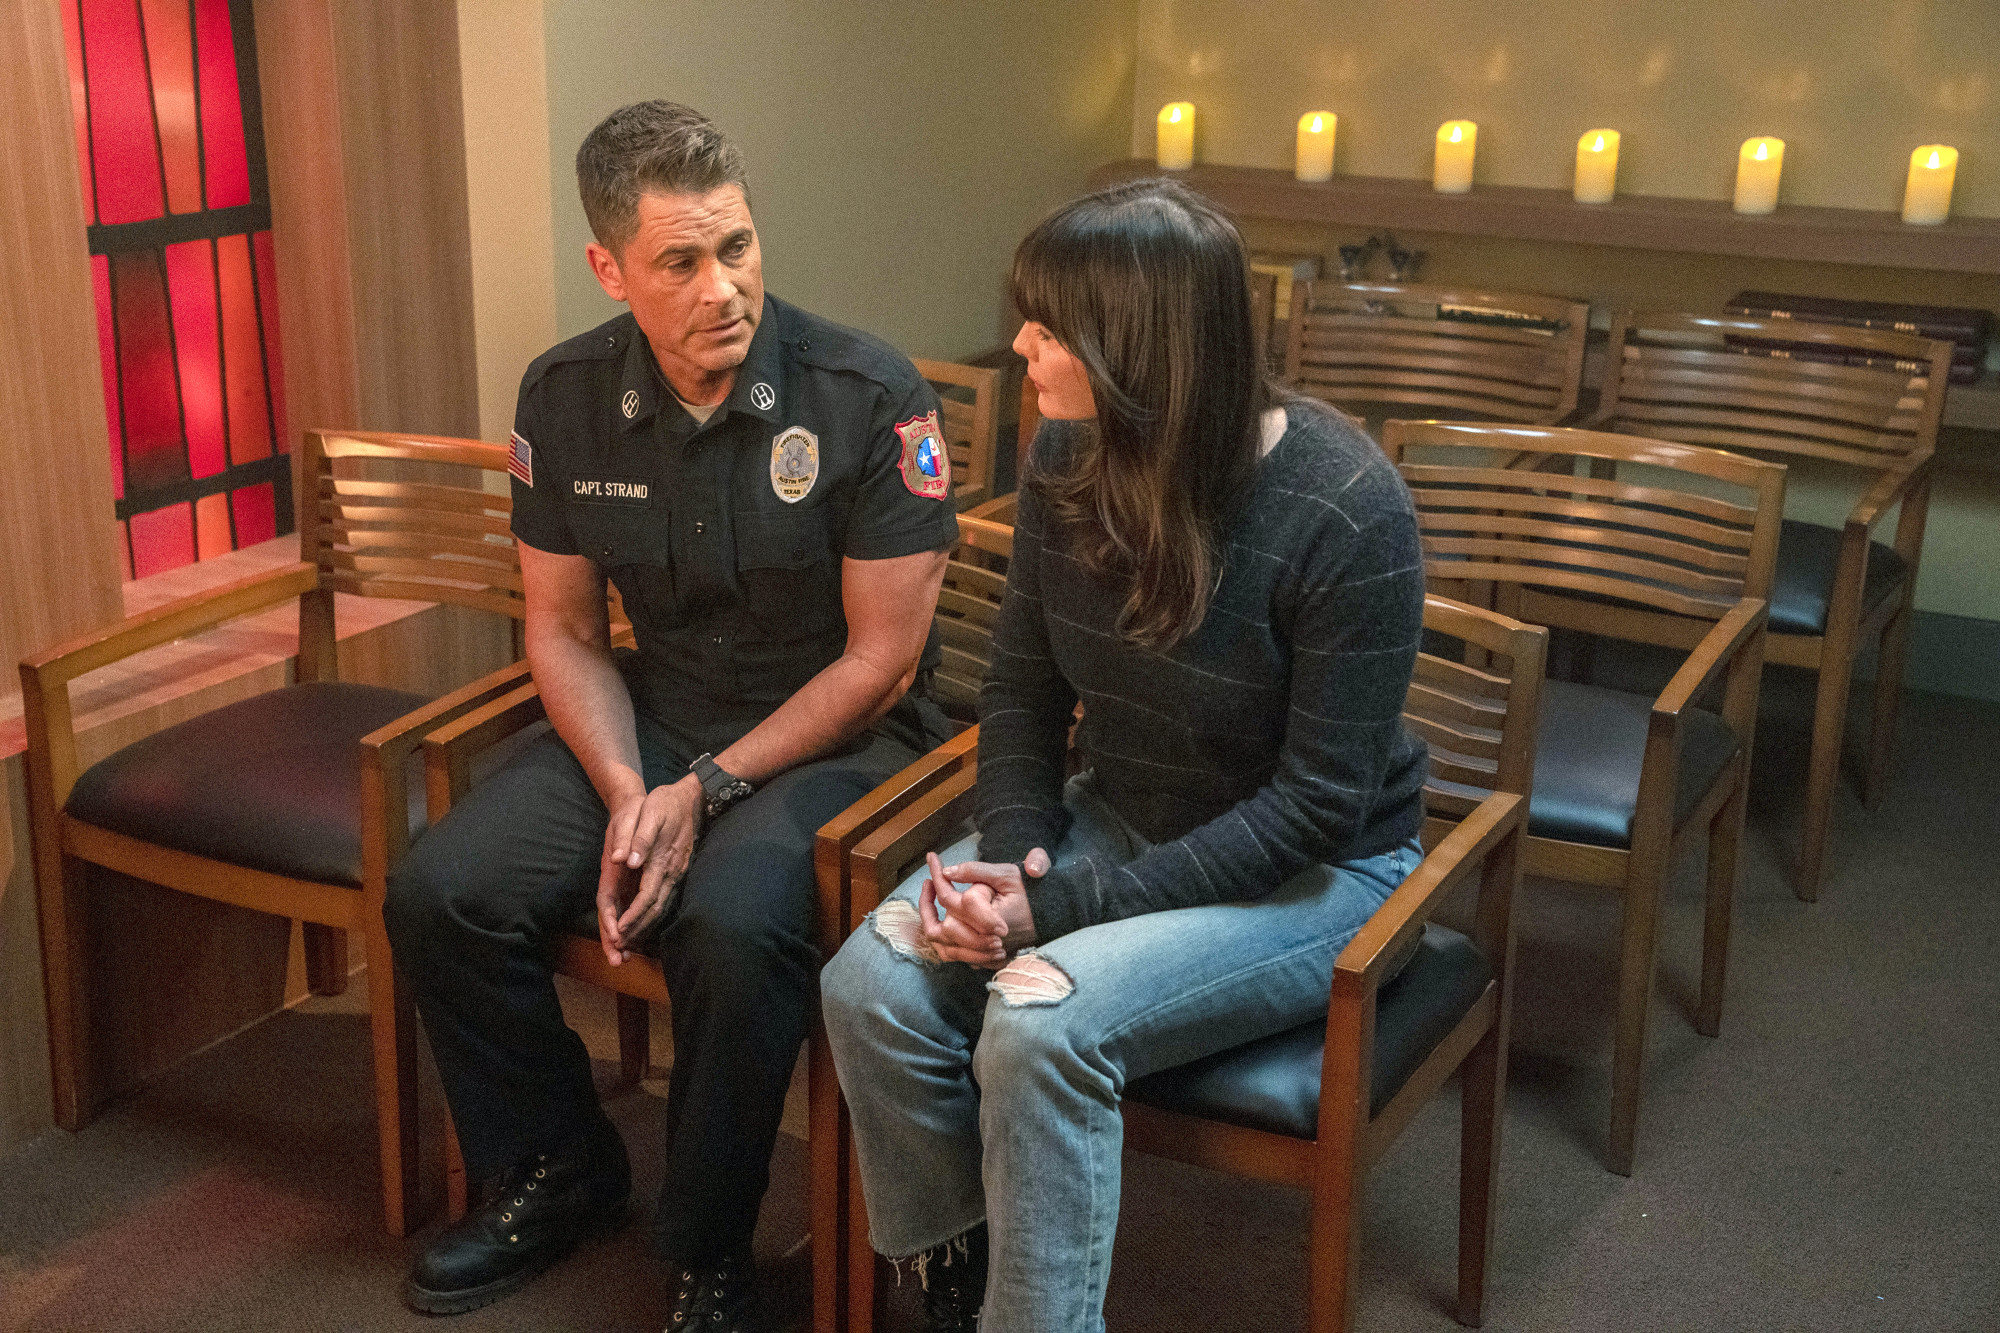 9-1-1: LONE STAR: L-R: Rob Lowe and Liv Tyler in the “Monster Inside” episode of 9-1-1: LONE STAR airing Monday, March 2 (8:00-9:01 PM ET/PT) on FOX. ©2020 Fox Media LLC. CR: Jack Zeman/FOX.